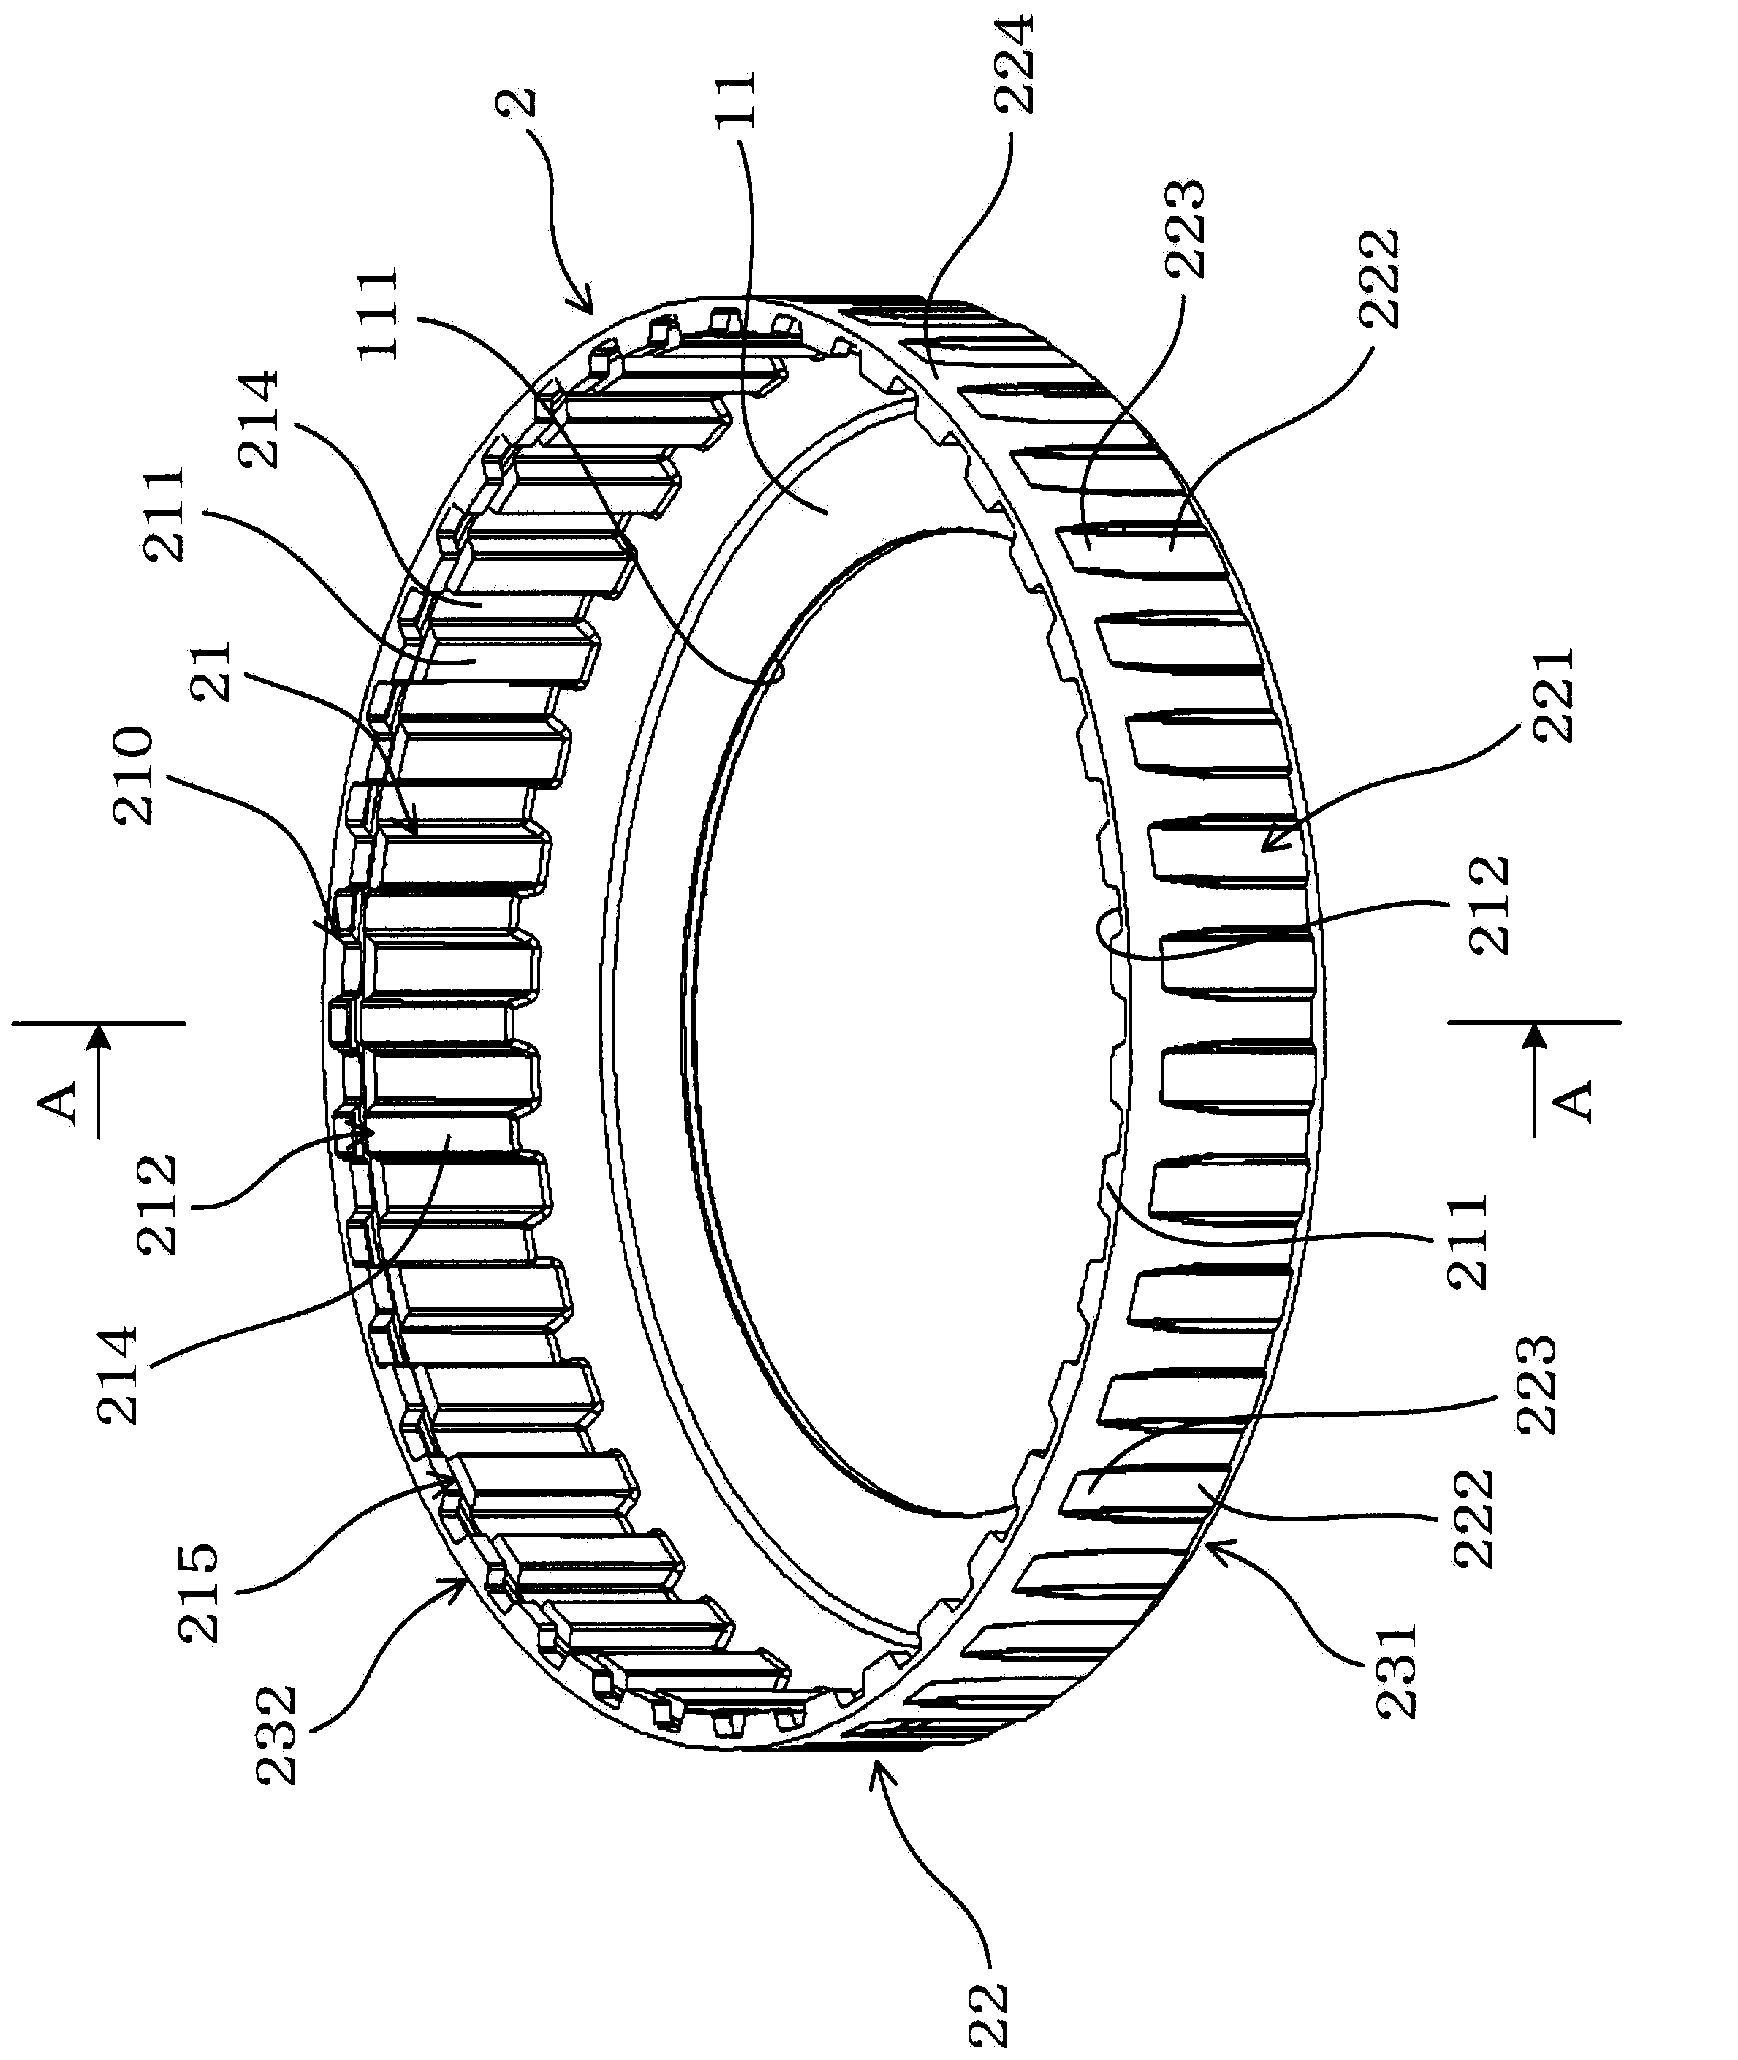 Cup-shaped part with inner peripheral uneven surface section, method for manufacturing cup-shaped part, and device for manufacturing cup-shaped part